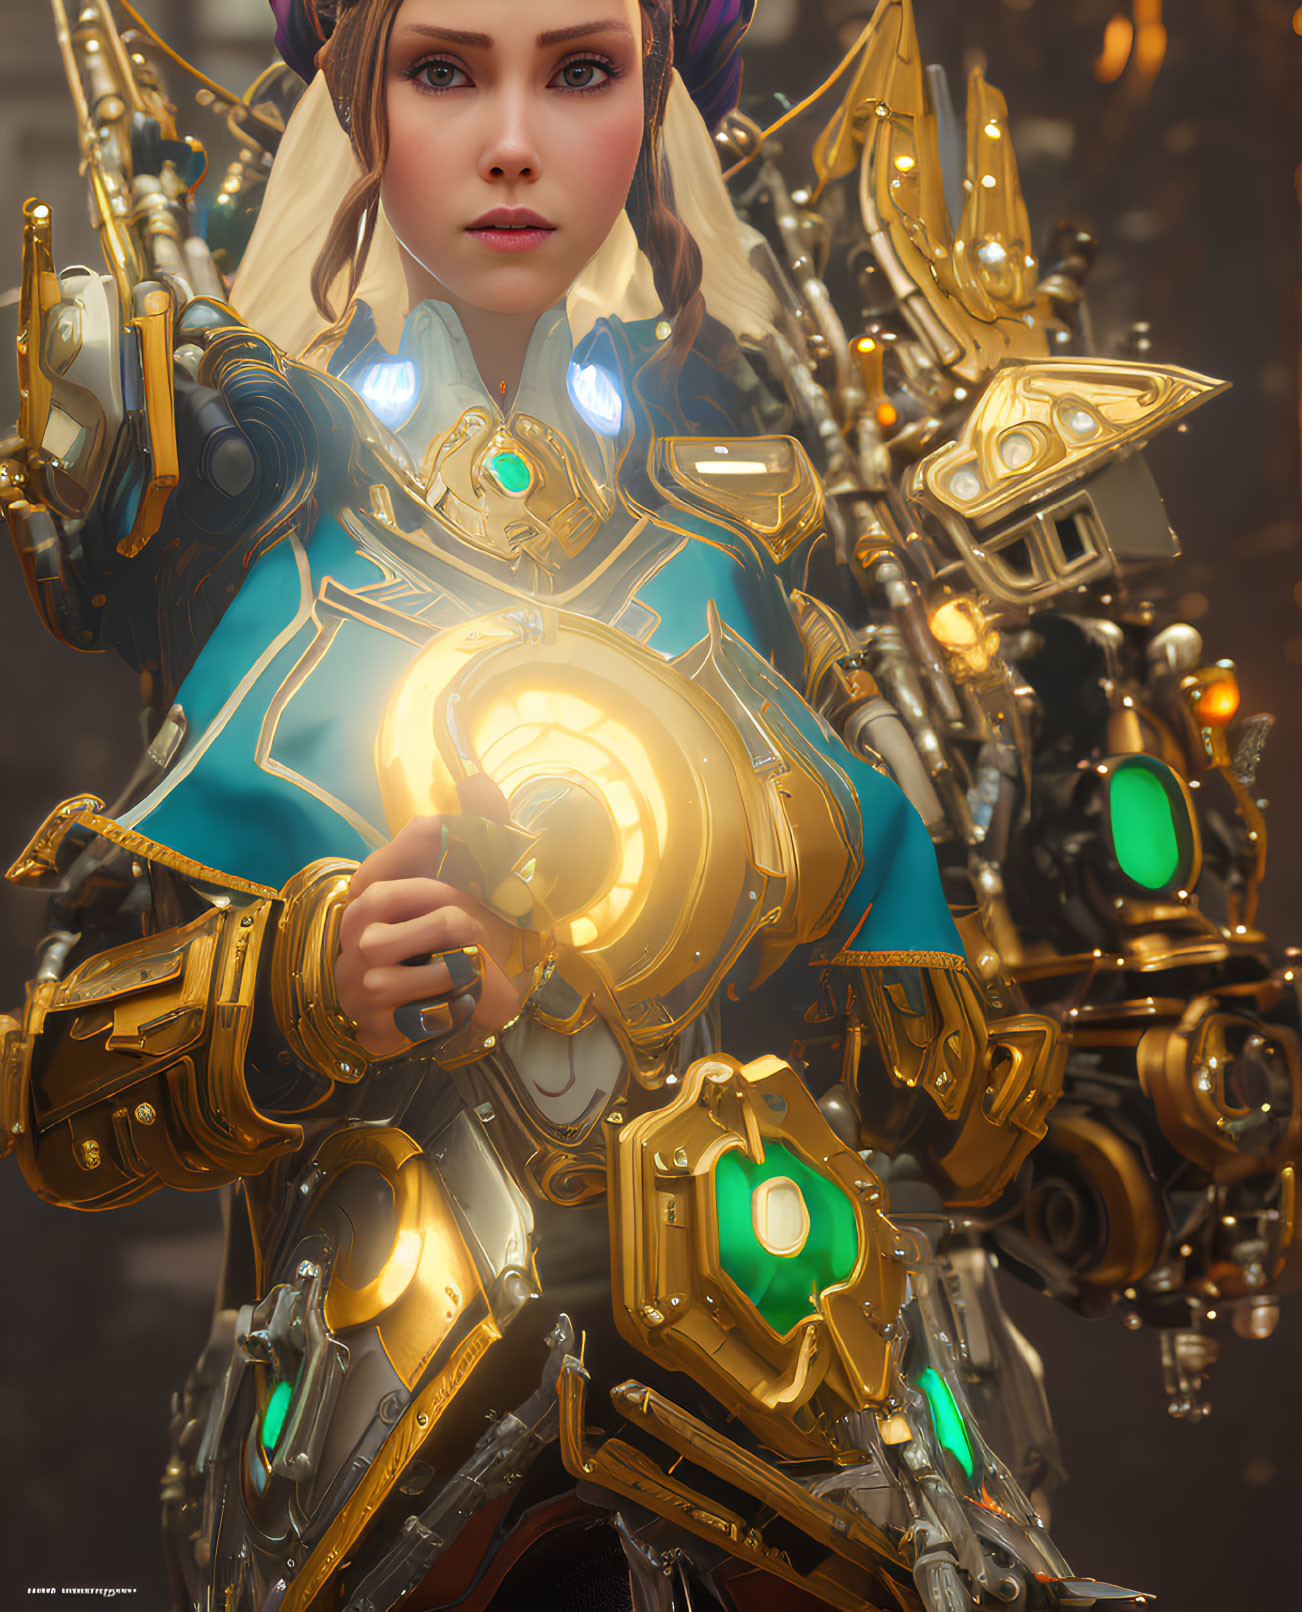 Female character in golden armor with blue elements and mechanical weapon